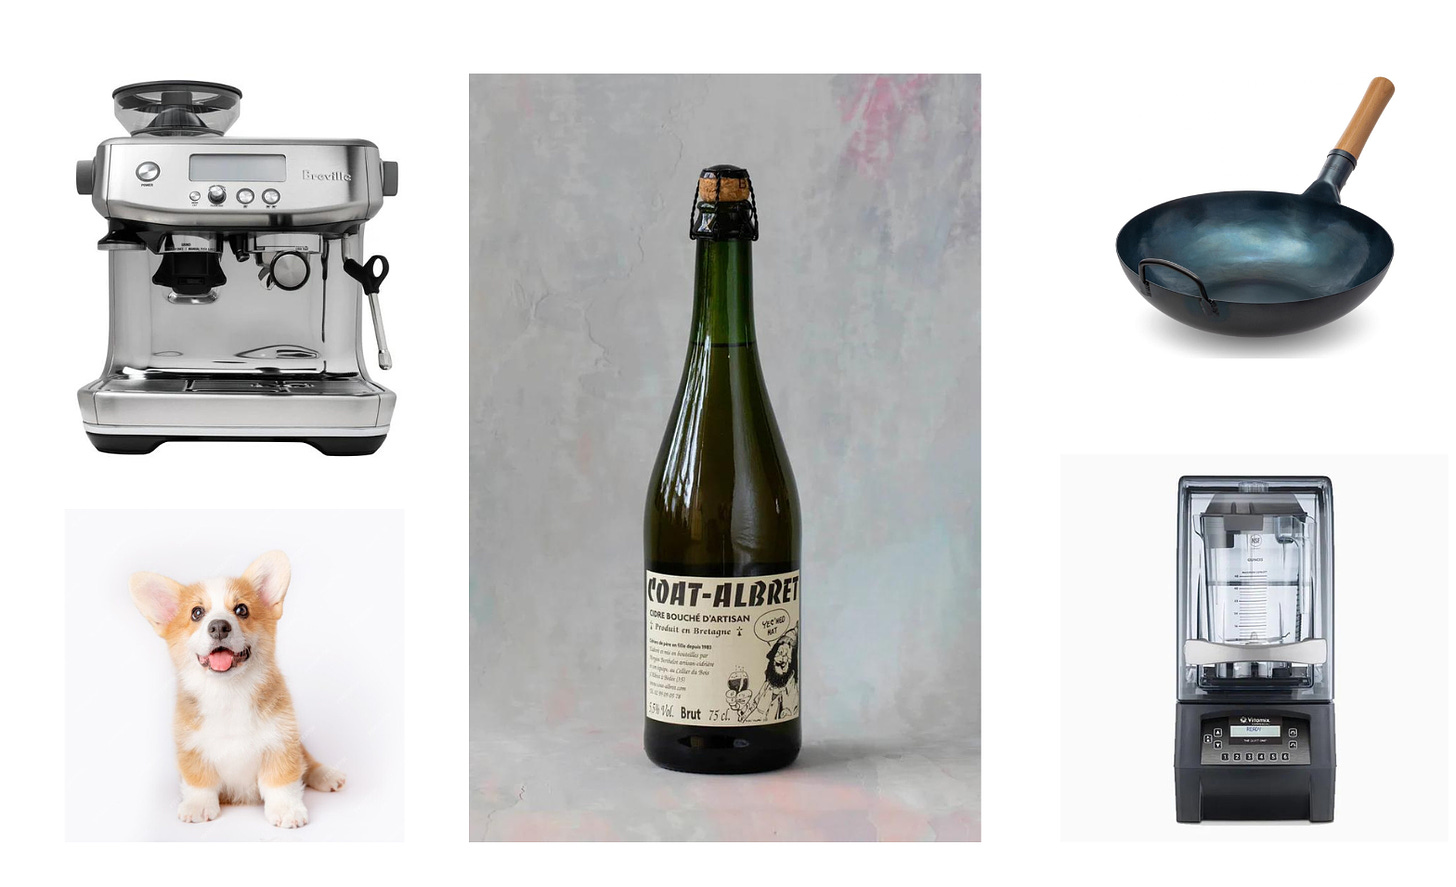 Clockwise from top left: a Breville Barista Pro espresso machine, a bottle of Coat-Albret cider, a carbon steel wok, a Vitamix The Quiet One blender, and a Corgi puppy